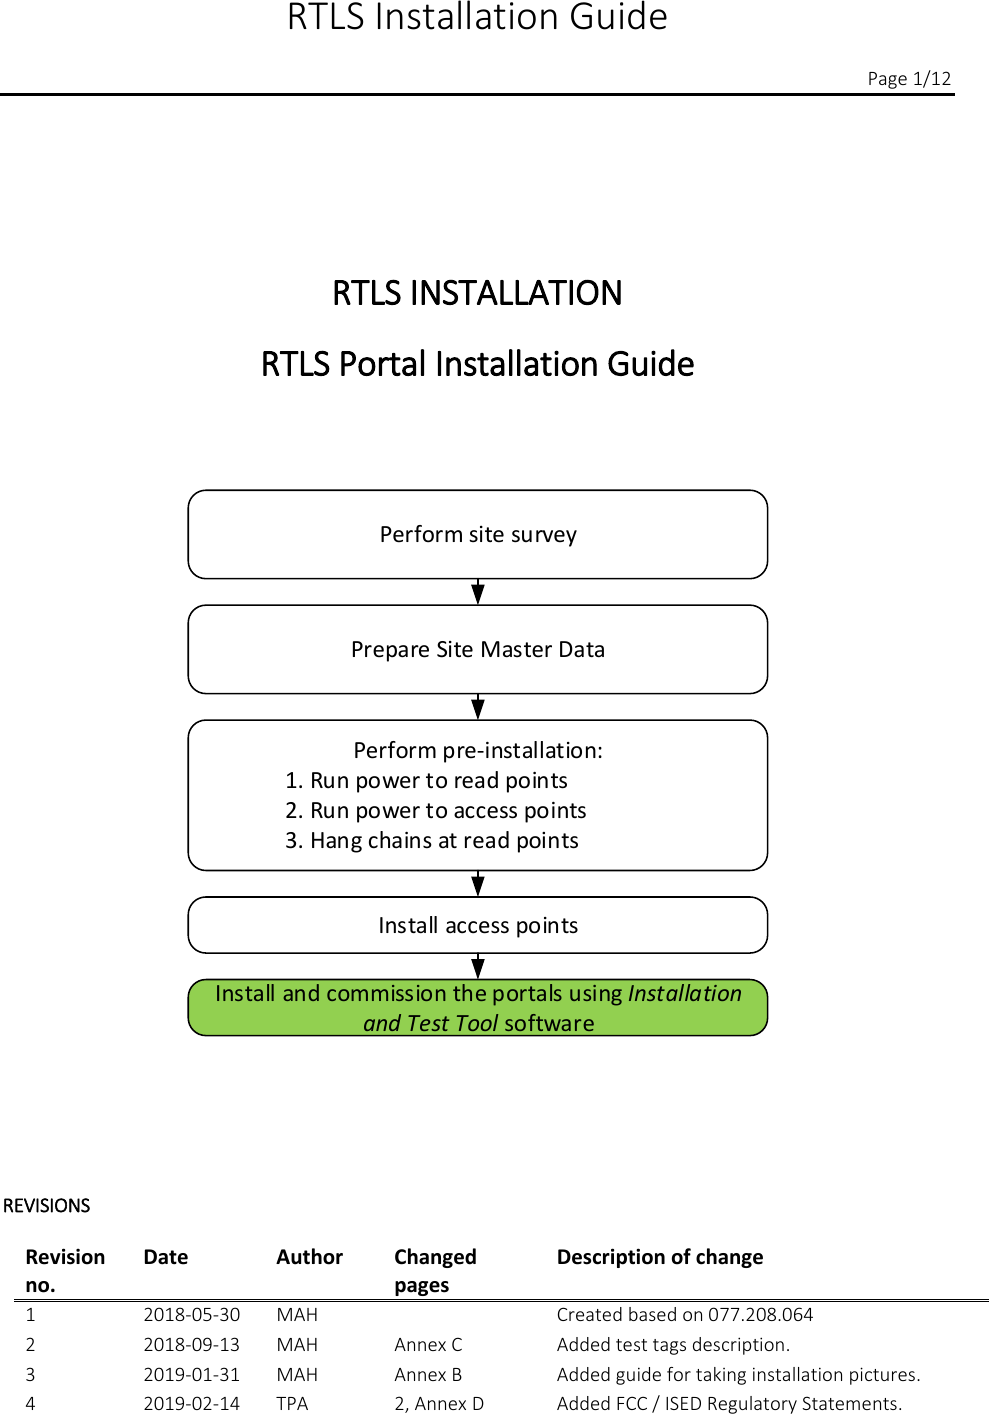  RTLS Installation Guide          Page 1/12      RTLS INSTALLATION   RTLS Portal Installation Guide     Prepare Site Master DataPerform pre-installation:1. Run power to read points2. Run power to access points3. Hang chains at read pointsInstall access pointsInstall and commission the portals using Installation and Test Tool softwarePerform site survey       REVISIONS  Revision no. Date Author Changed pages Description of change 1 2018-05-30 MAH  Created based on 077.208.064 2 2018-09-13 MAH Annex C Added test tags description. 3 2019-01-31 MAH Annex B Added guide for taking installation pictures. 4 2019-02-14 TPA 2, Annex D Added FCC / ISED Regulatory Statements. 